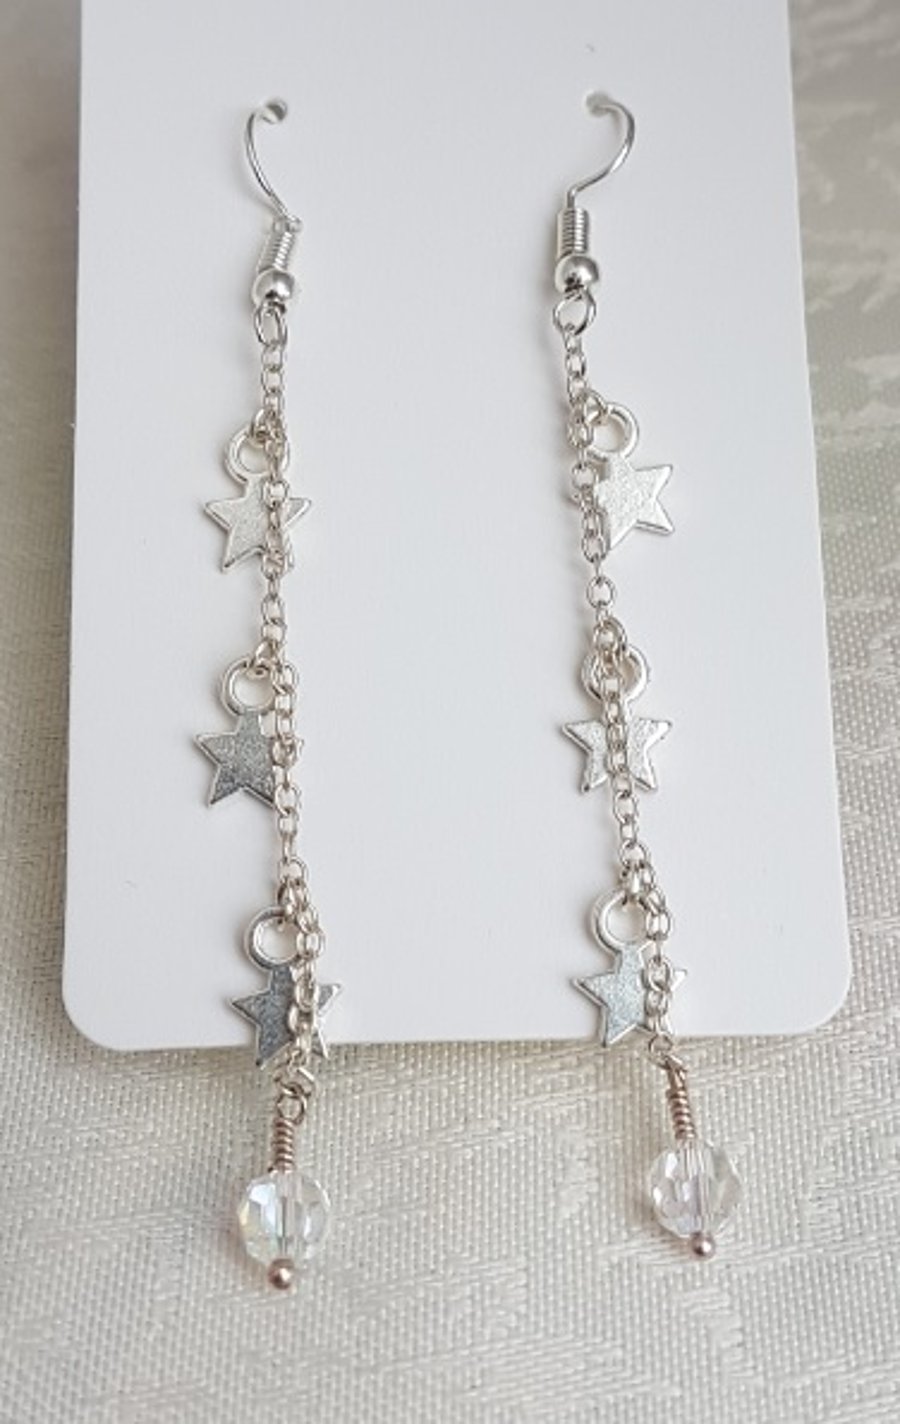 Gorgeous Stars and Crystal Dangle Earrings